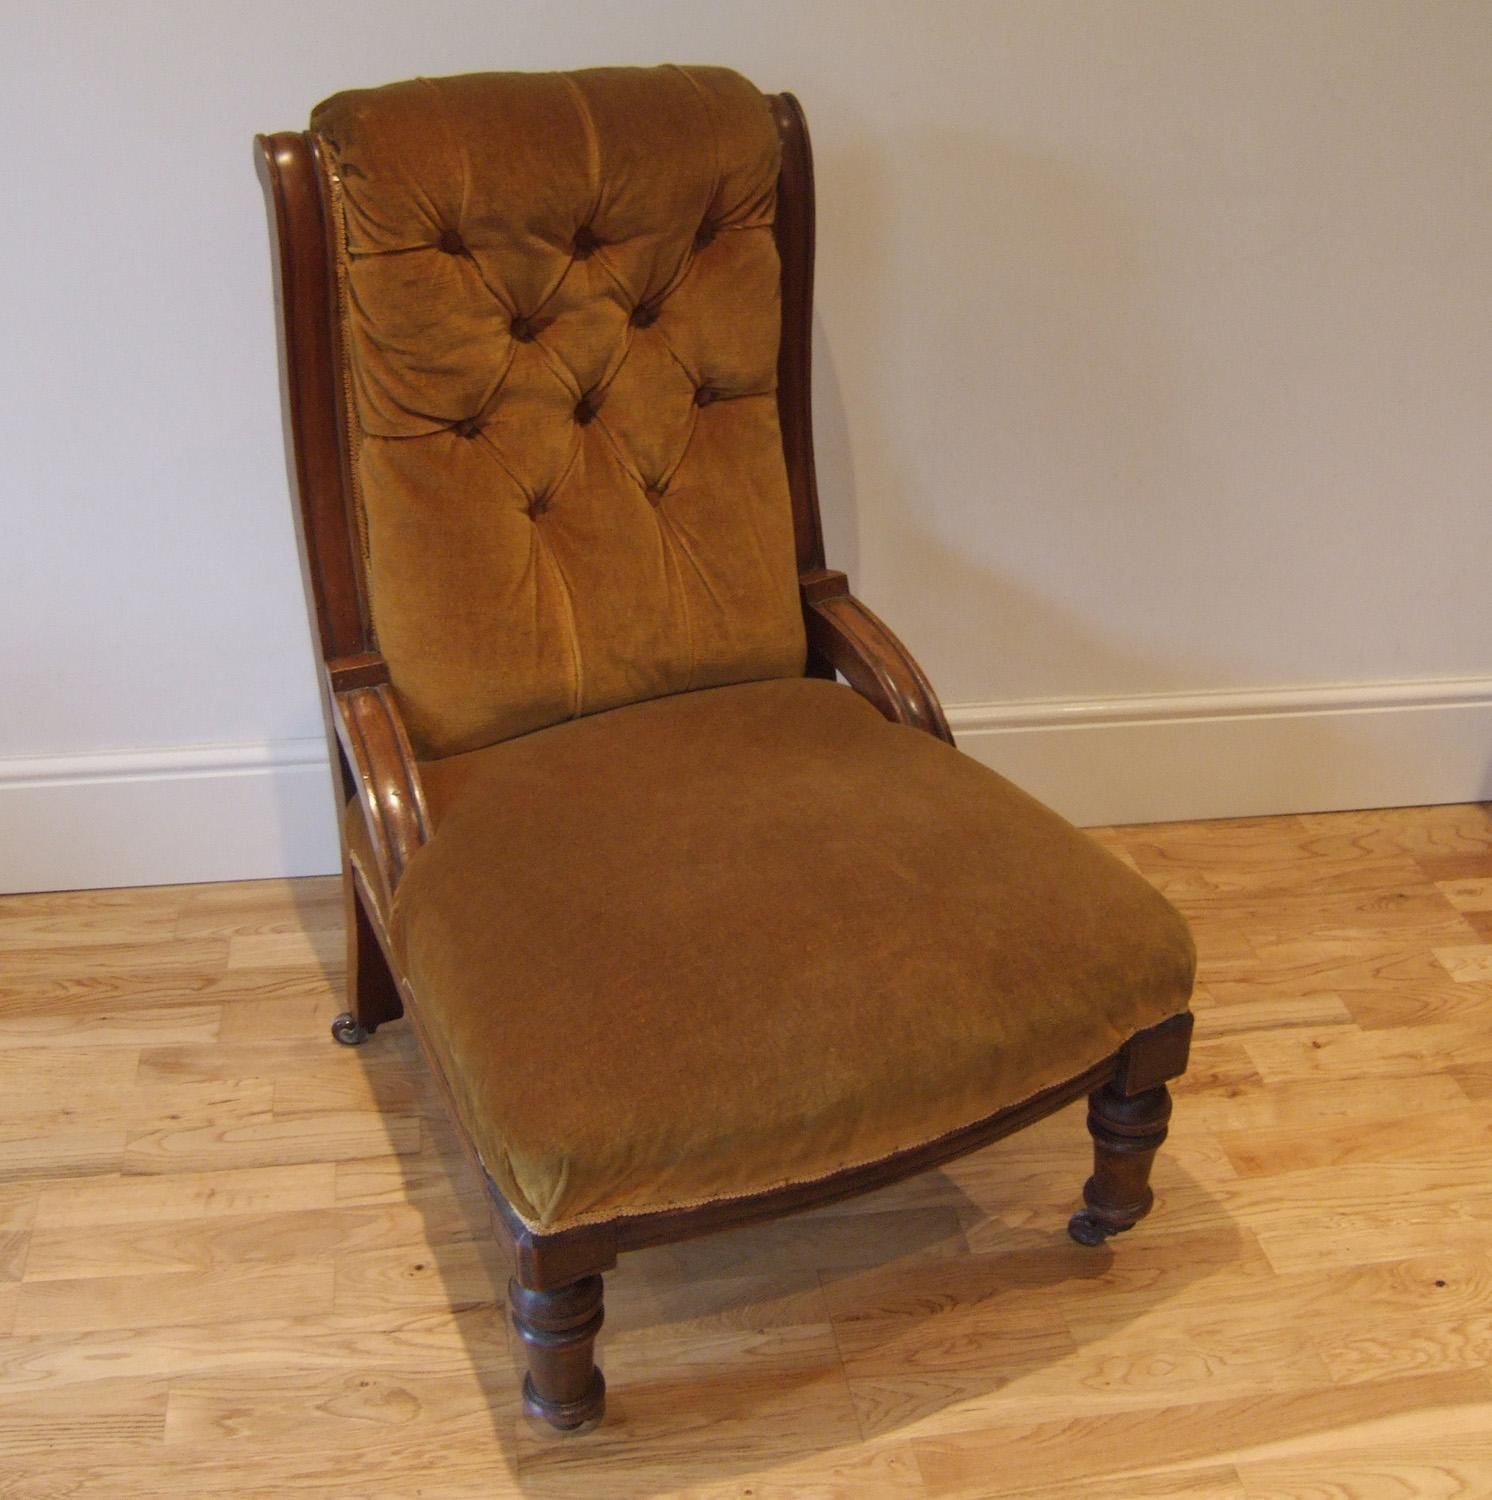 Victorian nursing chair - Antique Chairs - Hemswell Antique Centres